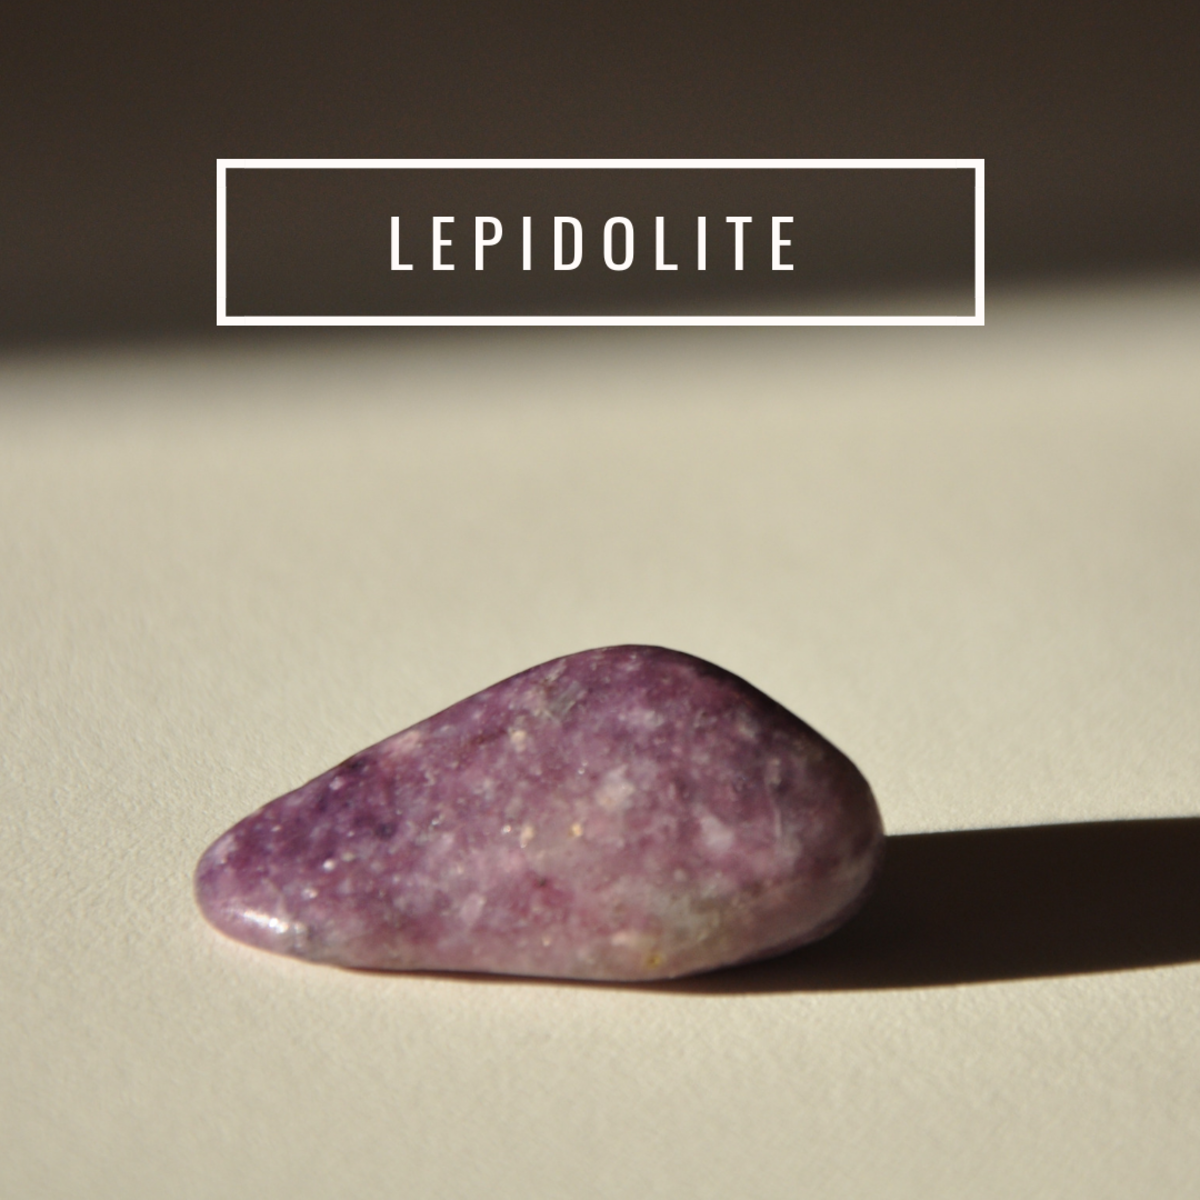 Lepidolite contains naturally occurring lithium, which is commonly used in anti-anxiety medications.